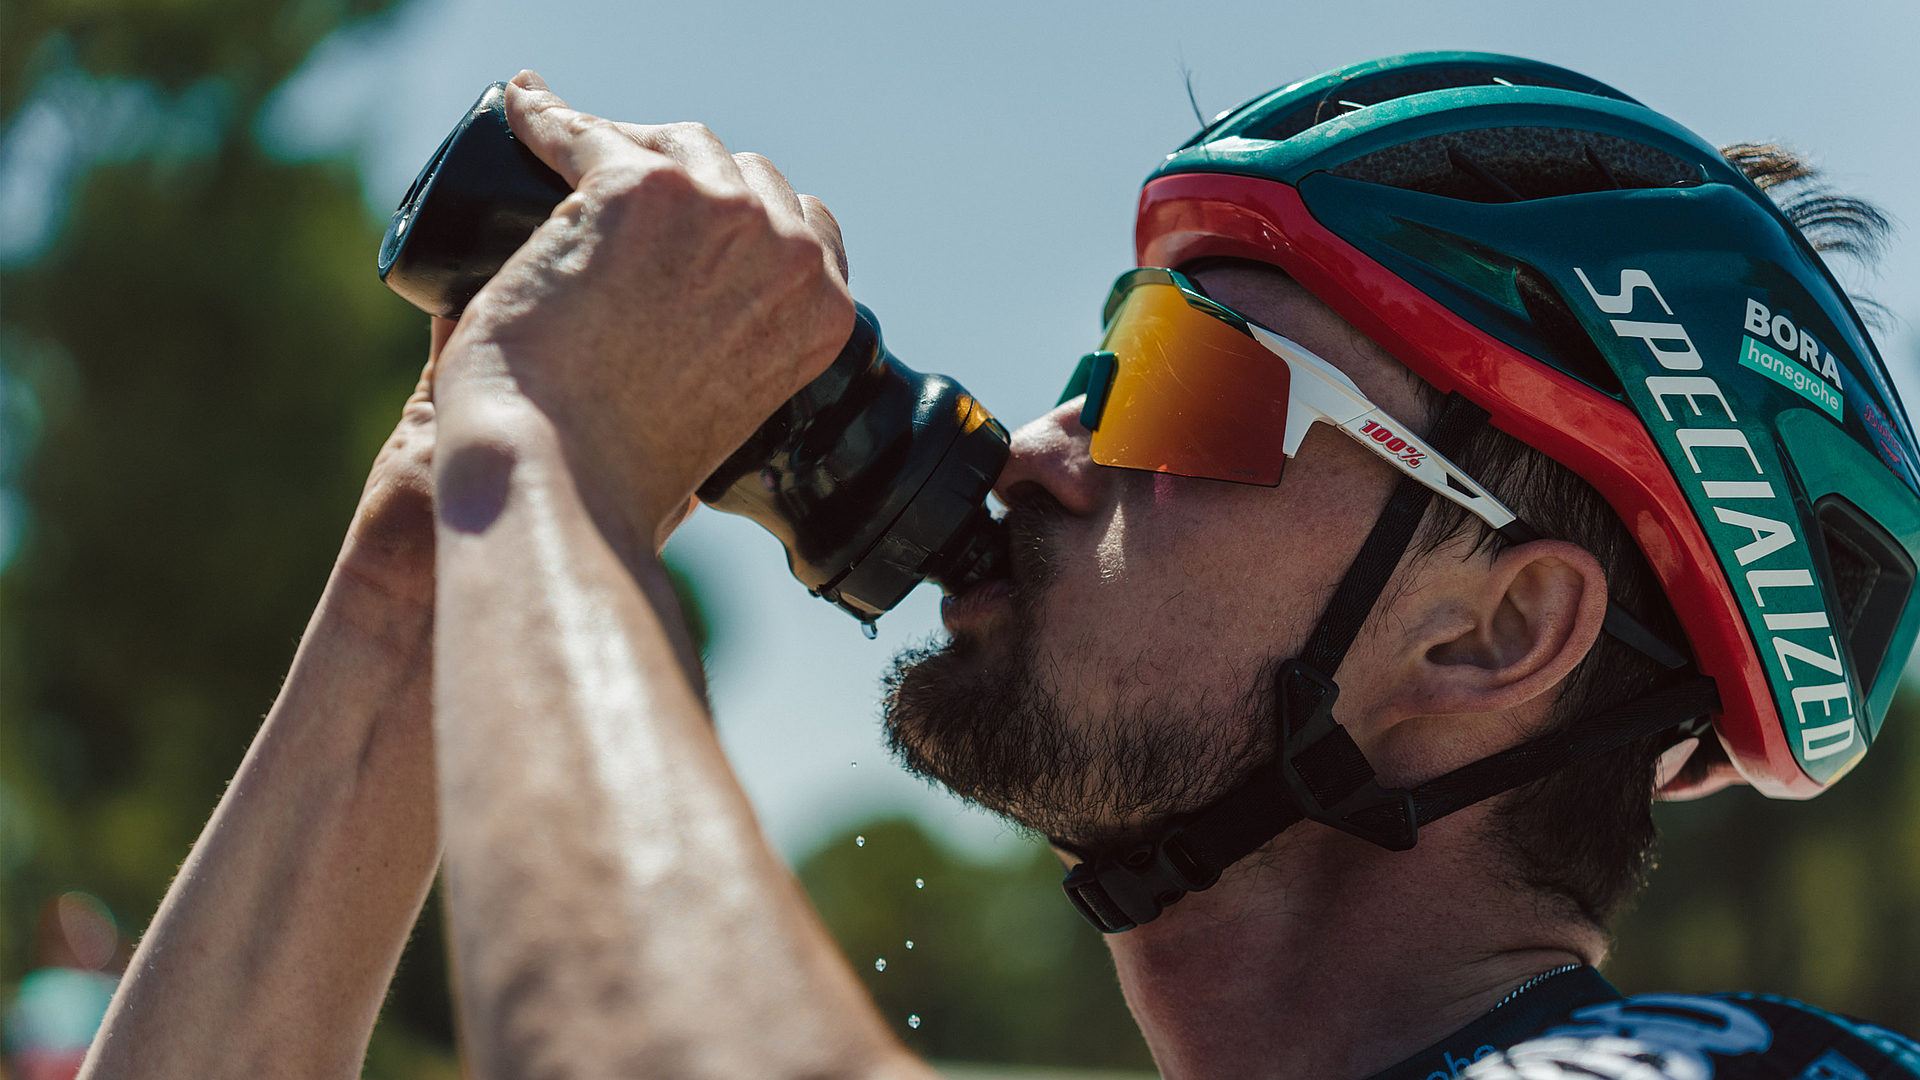 BORA - hansgrohe Top 5: Staying cool despite the heat